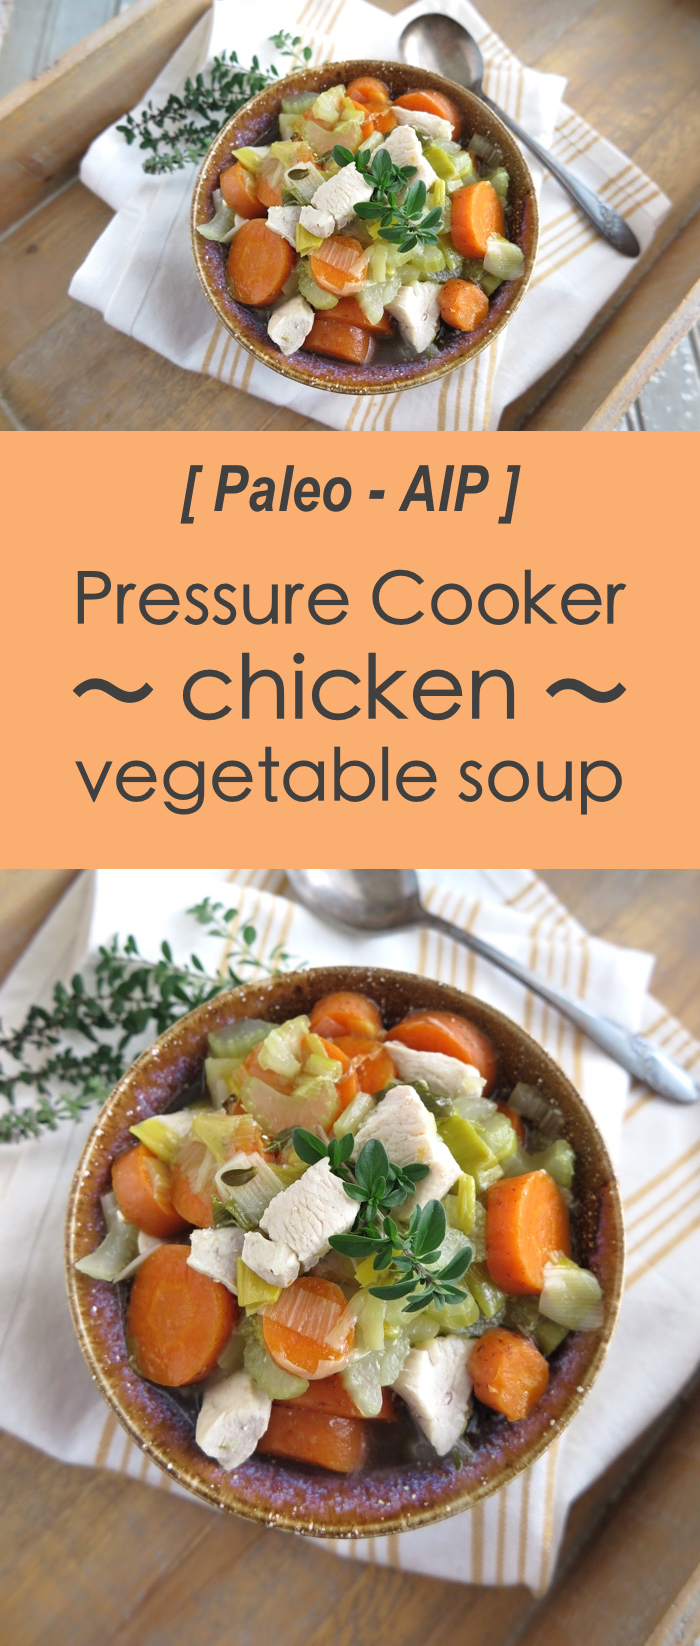 The Best Pressure Cooker Chicken Vegetable Soup! (Paleo, AIP, Instant Pot)